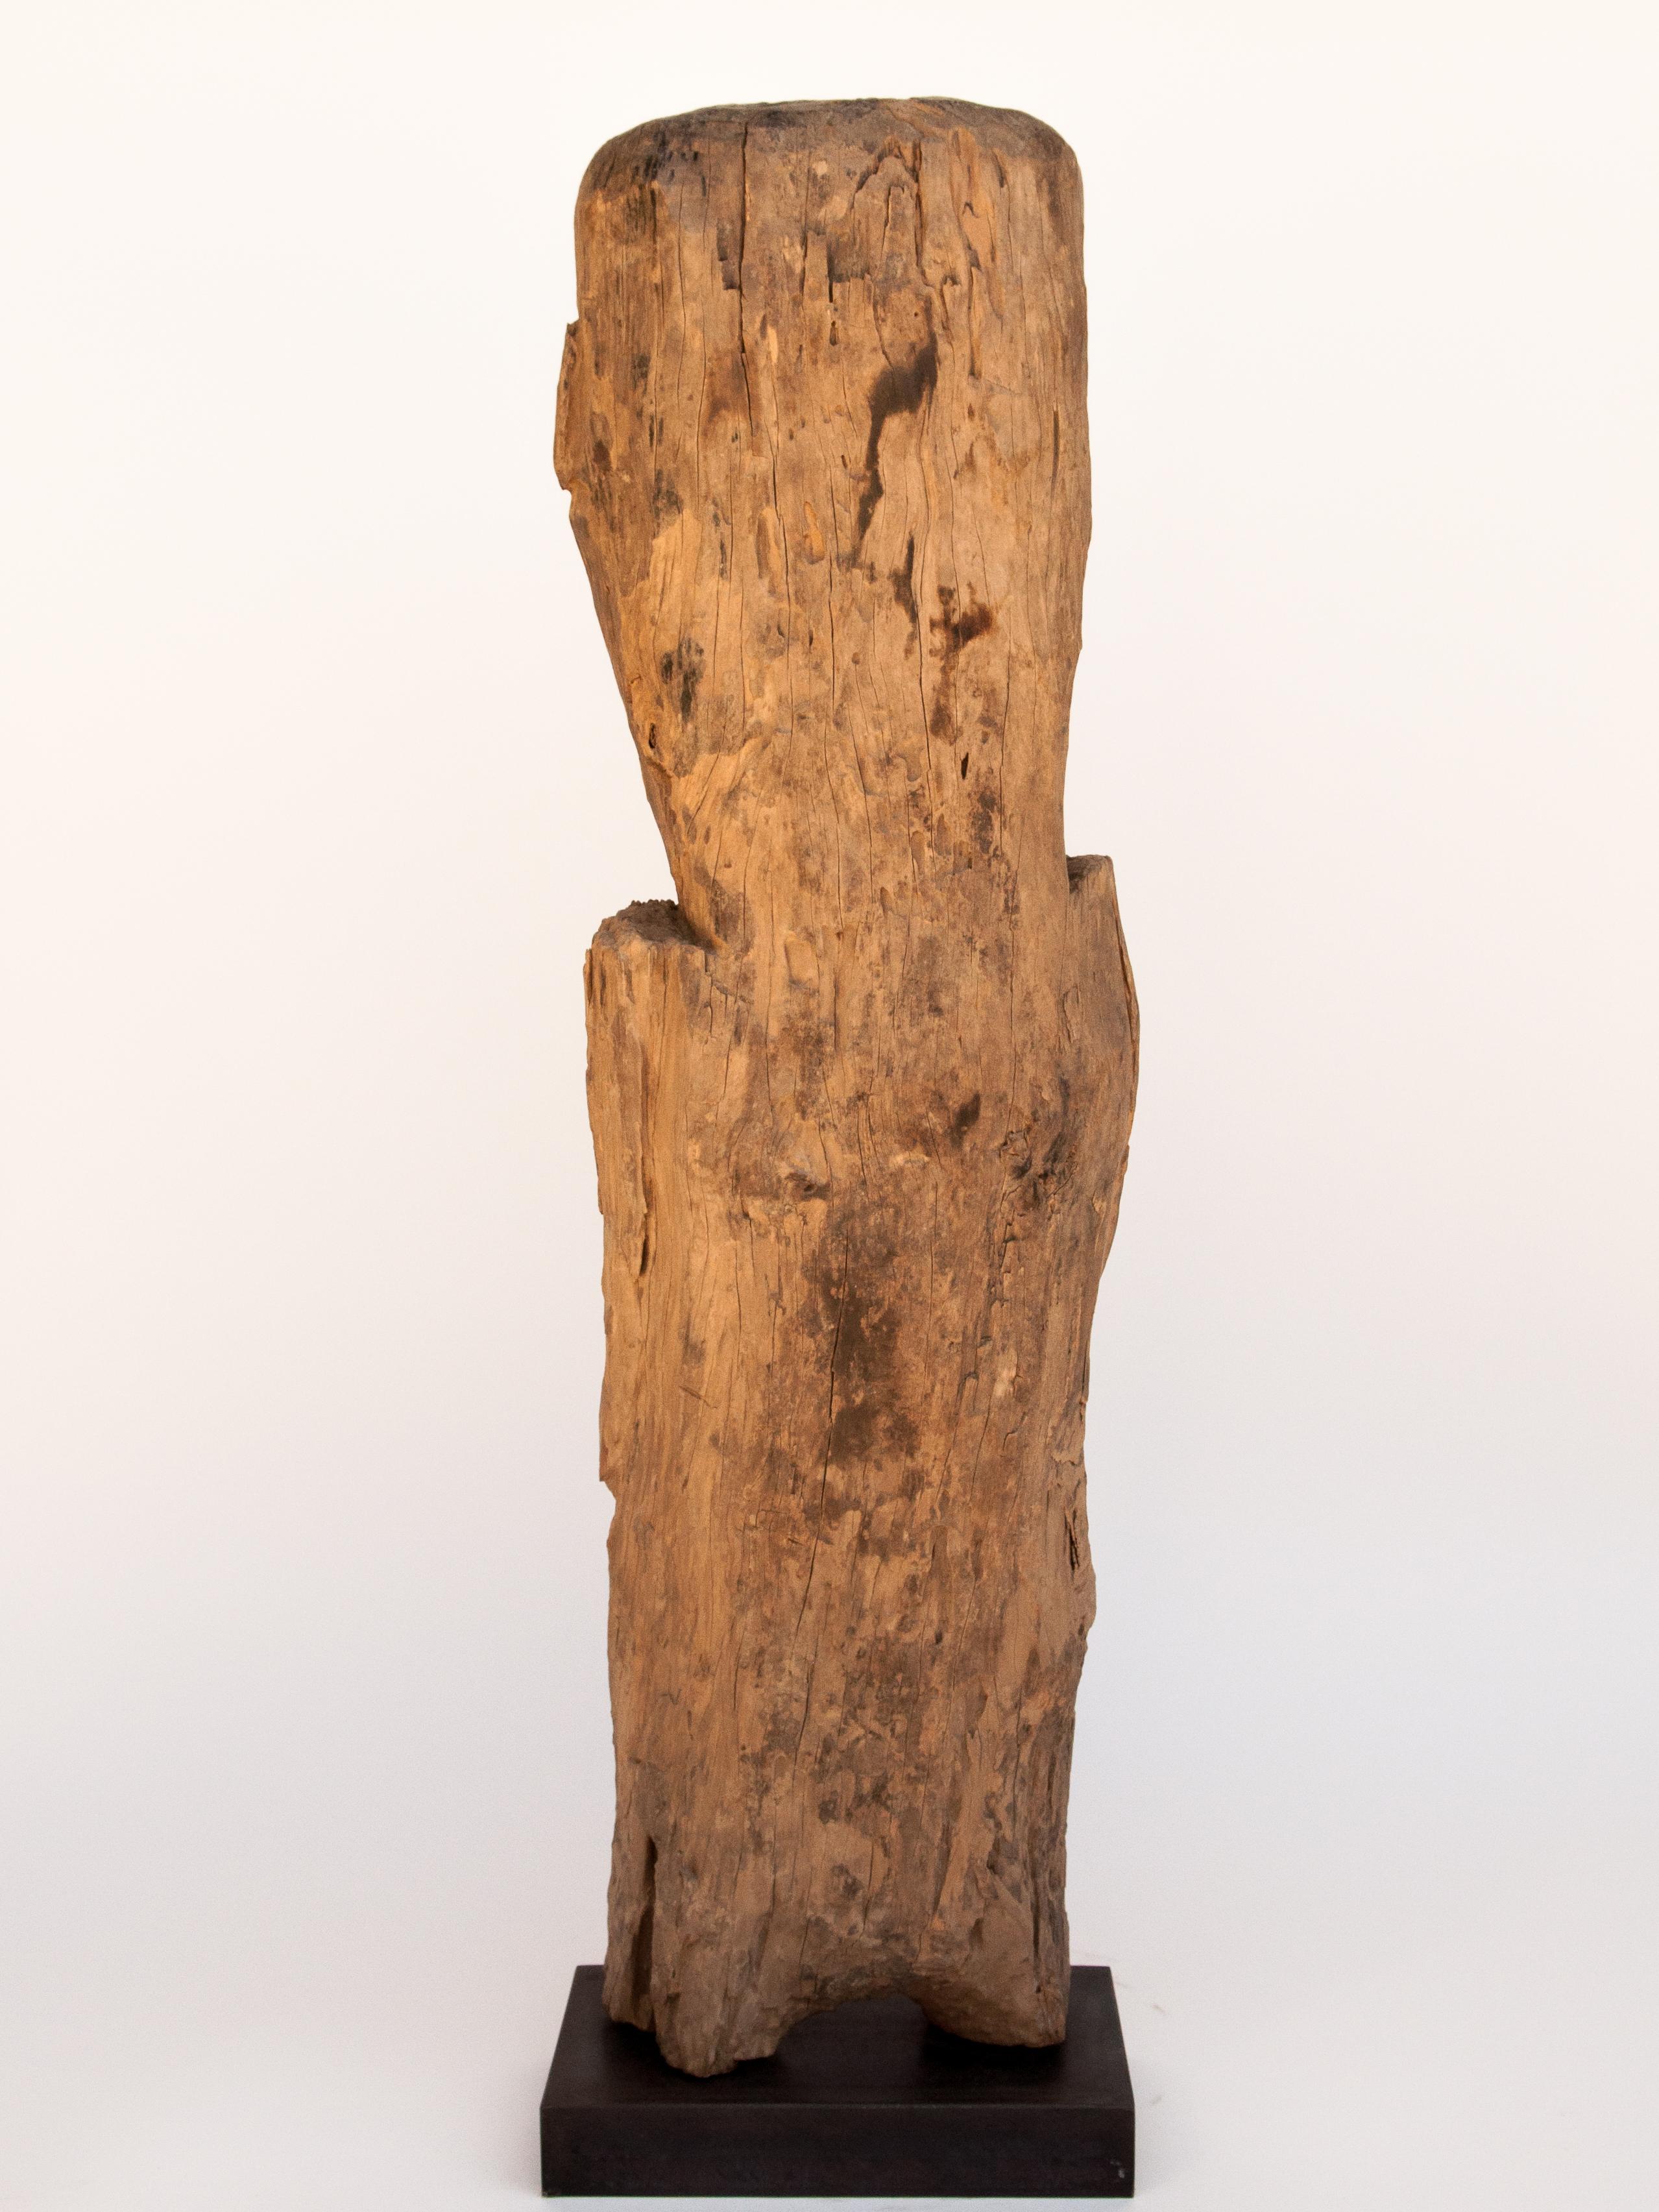 Wooden Tribal Statue or Bridge Figure from West Nepal, Early to Mid-20th Century 8